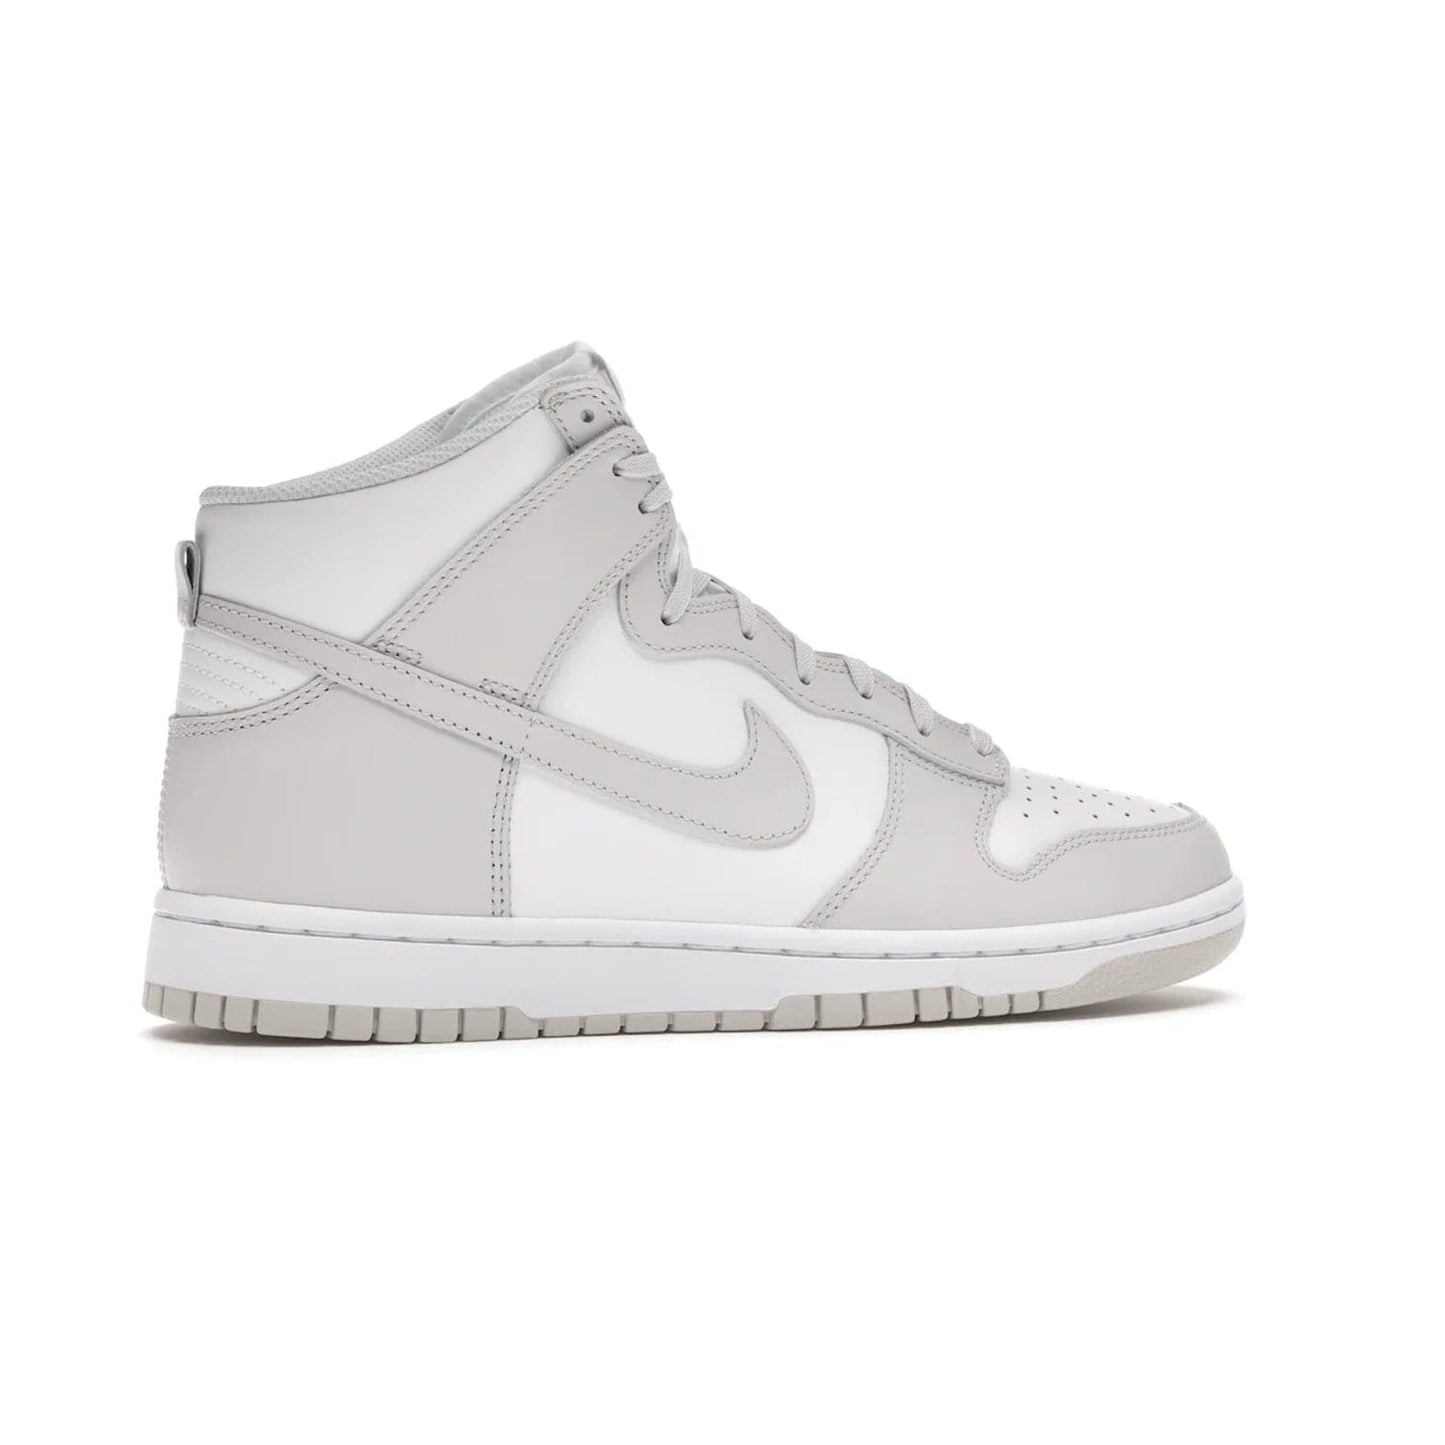 Nike Dunk High Retro White Vast Grey (2021) - Image 35 - Only at www.BallersClubKickz.com - Nike Dunk High Retro White Vast Grey 2021: classic '80s basketball sneaker with a crisp white base, grey overlays, midsole tooling and outsole. Dropped Feb. 2021.